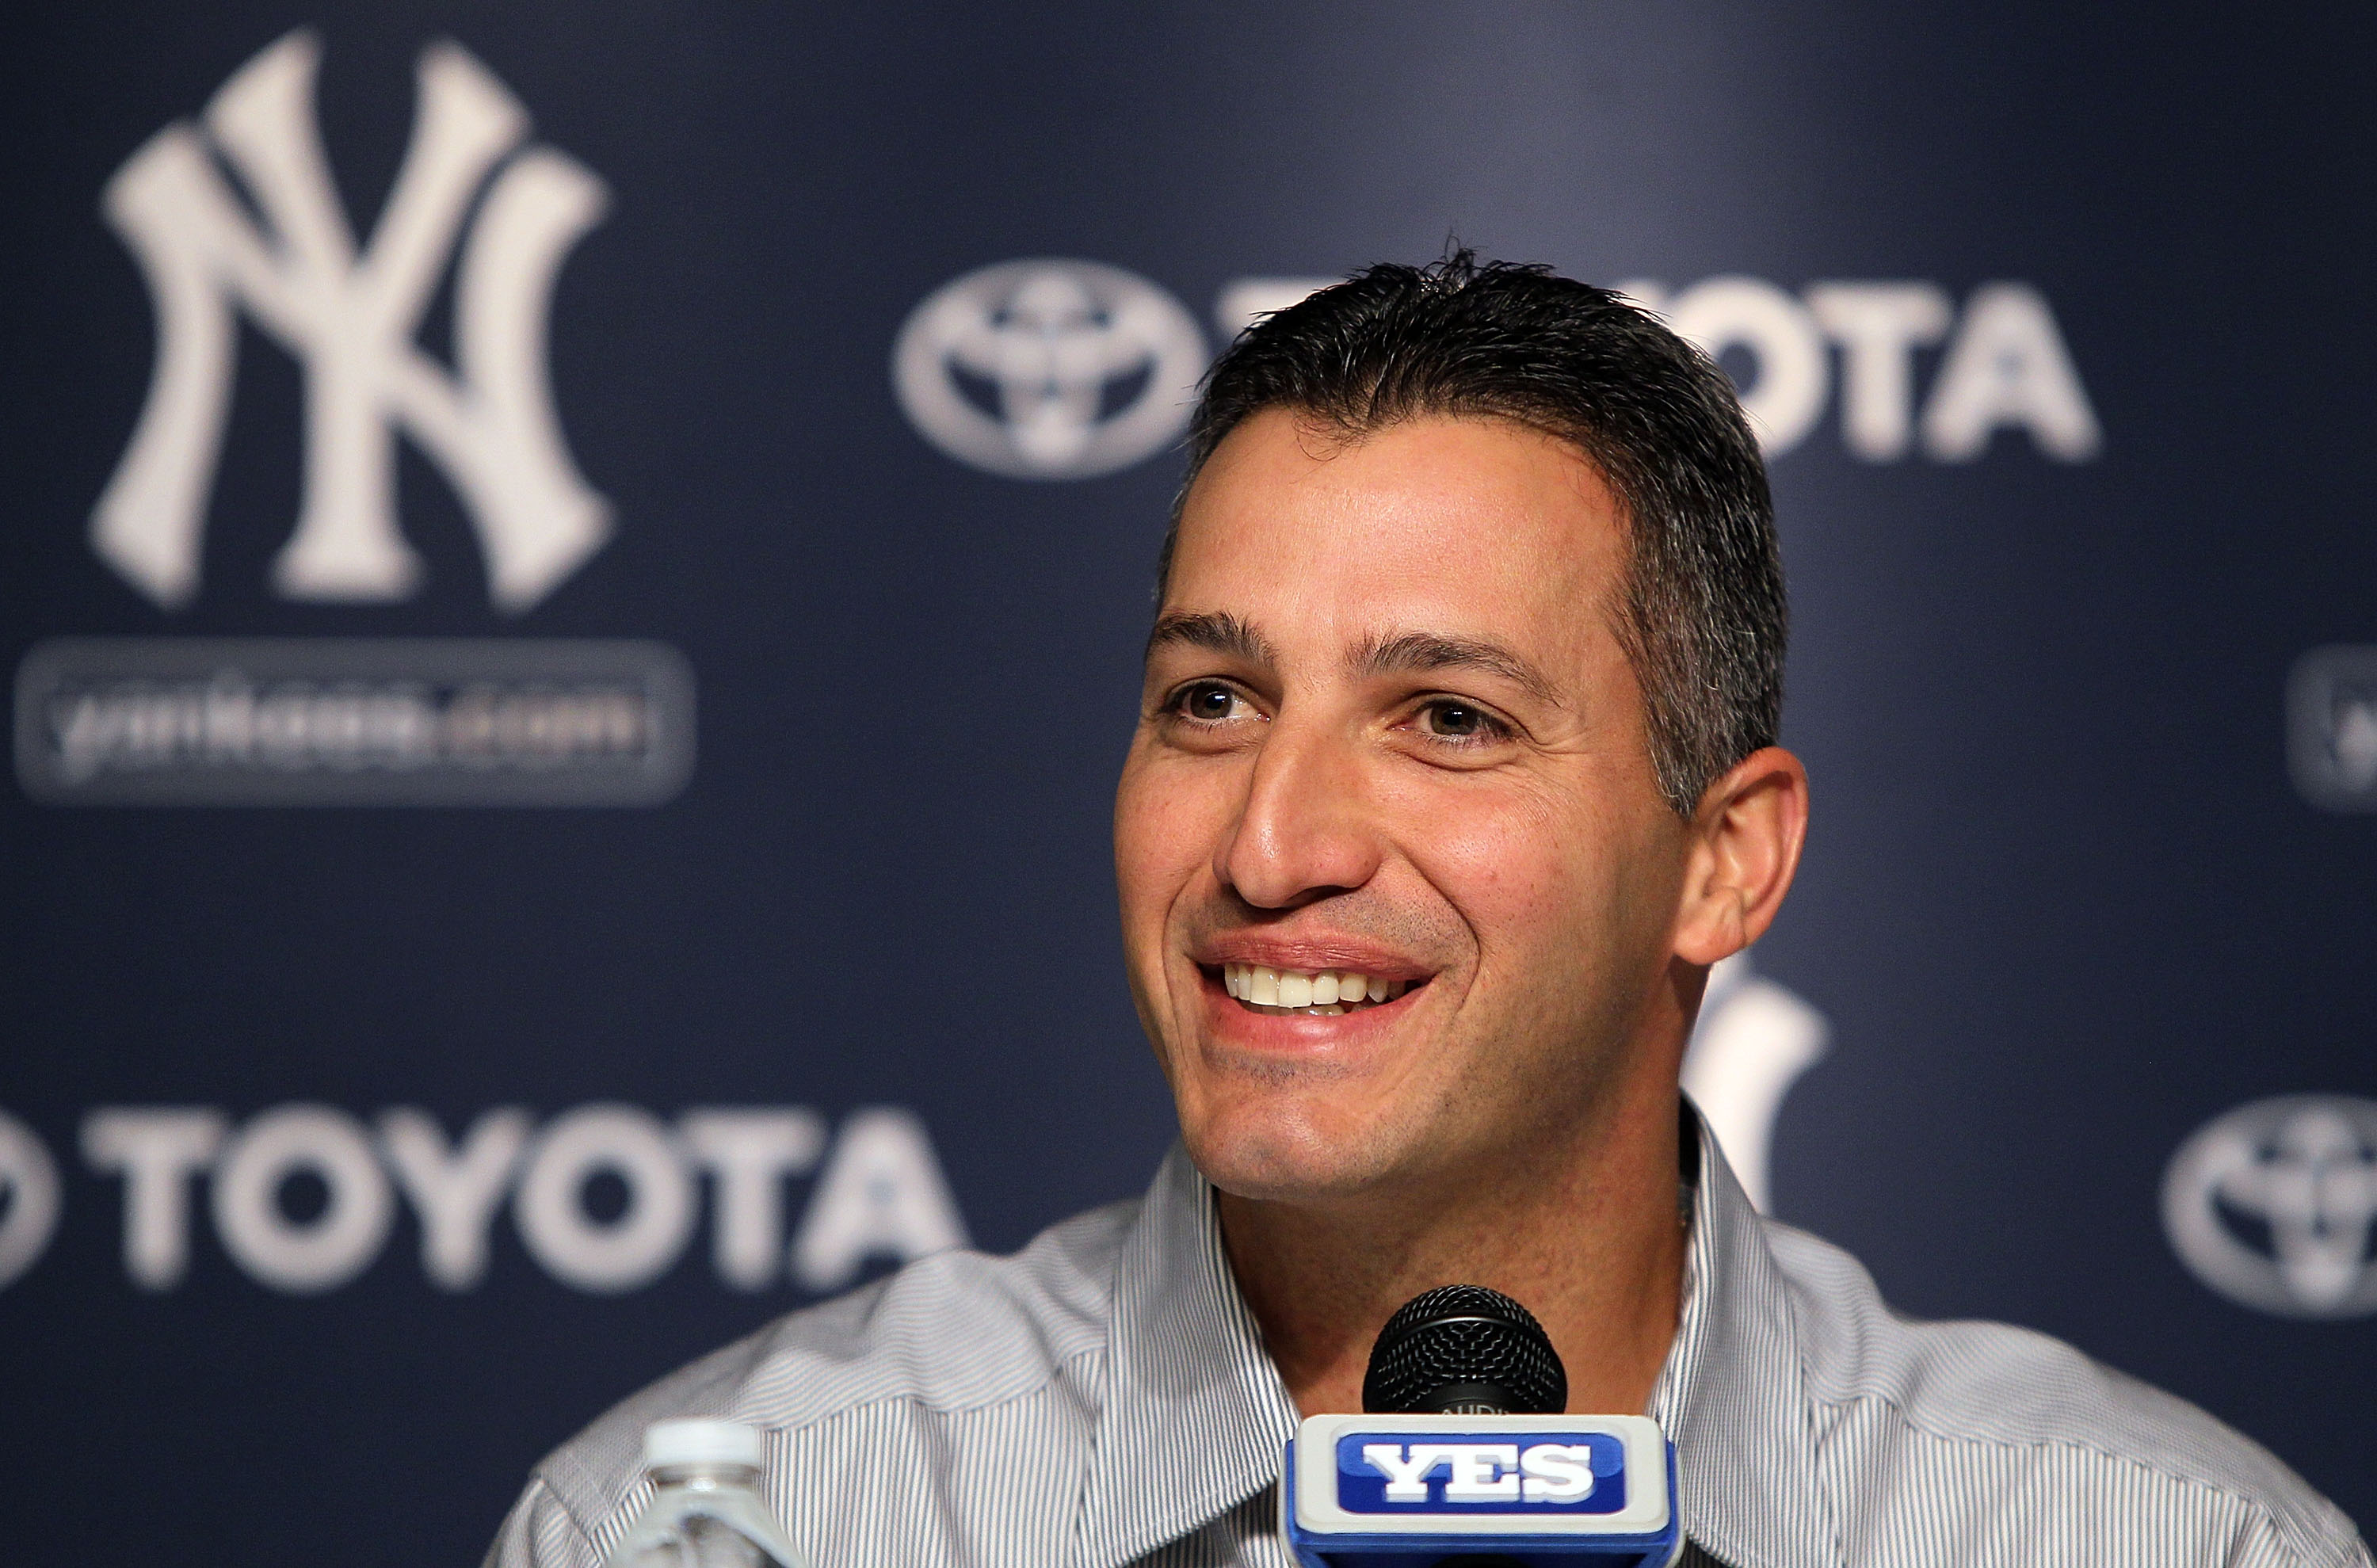 New York Yankees: Is the End Near for What's Left of Core Four